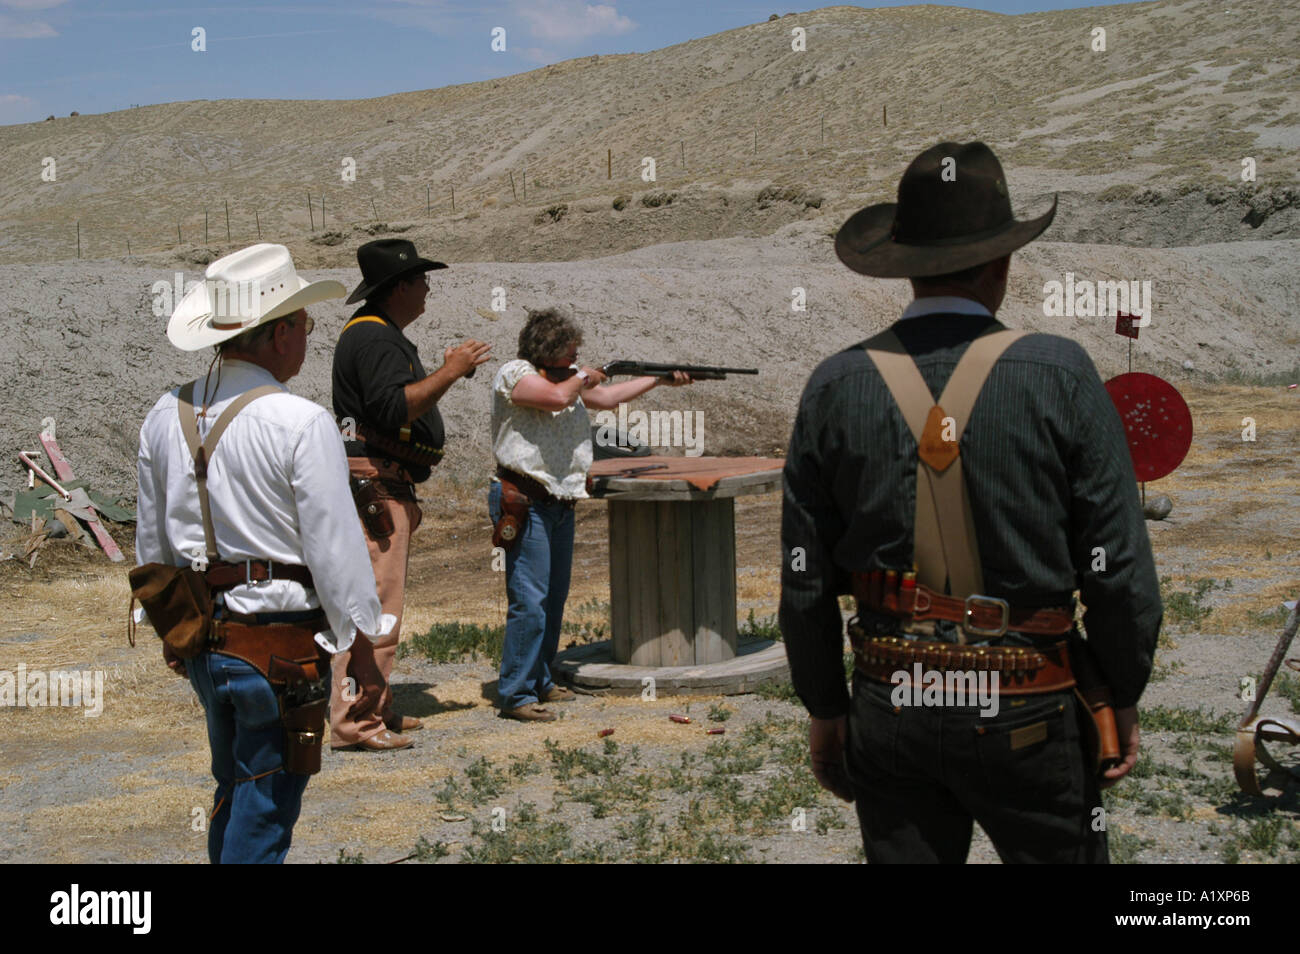 Members of Colorado gun club the Comanche Valley Vigilantes take aim and shoot during a dressed up re enactment of scenes from the Wild West using antique firearms Stock Photo